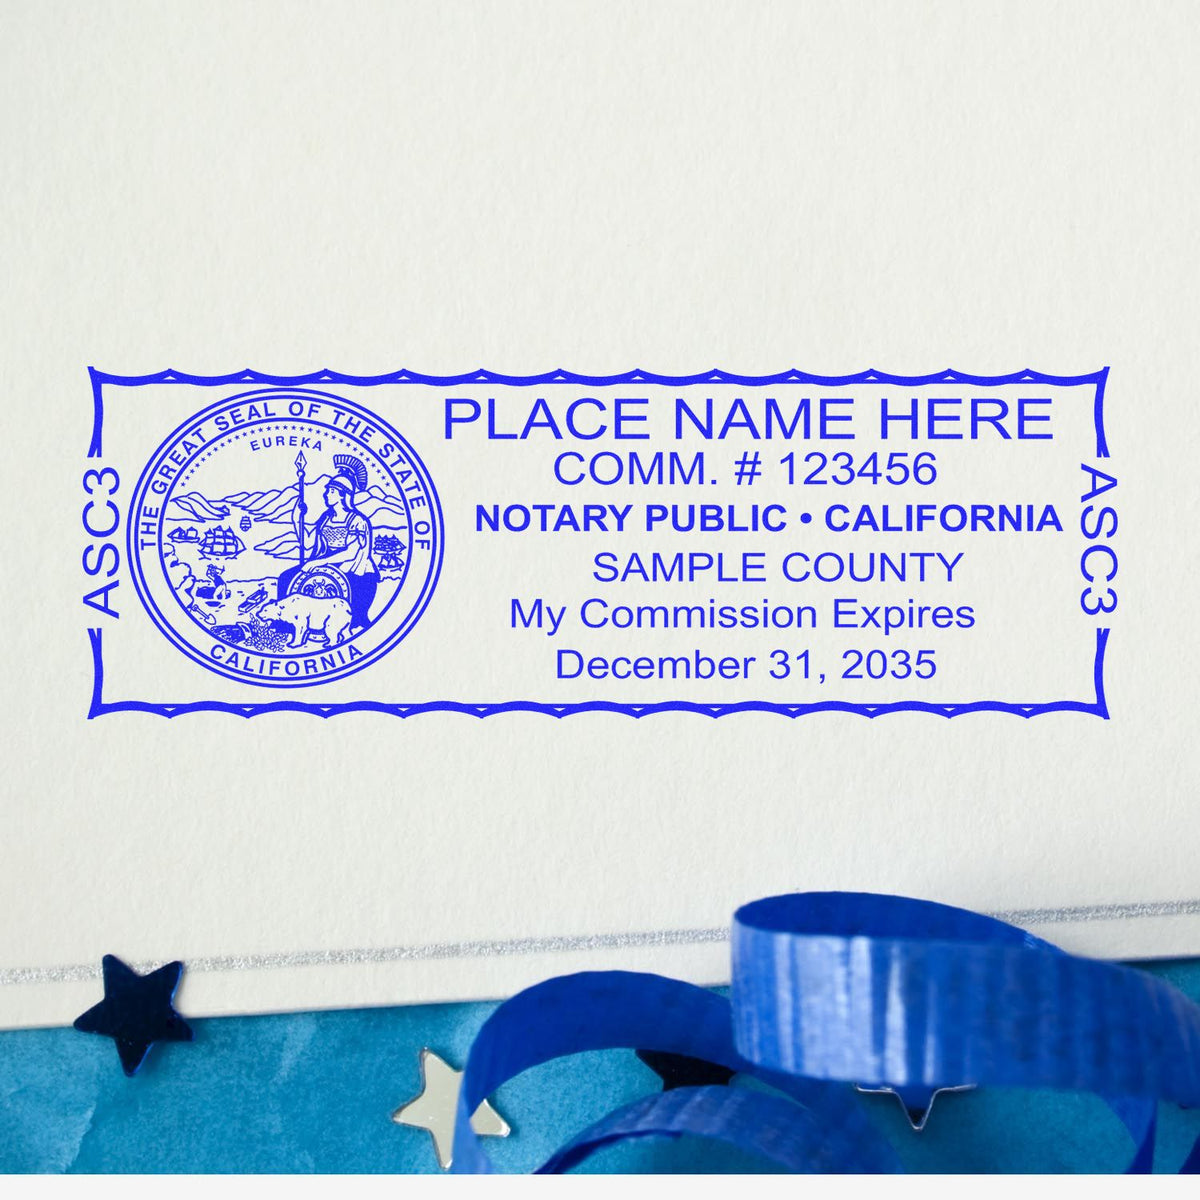 This paper is stamped with a sample imprint of the Wooden Handle California State Seal Notary Public Stamp, signifying its quality and reliability.